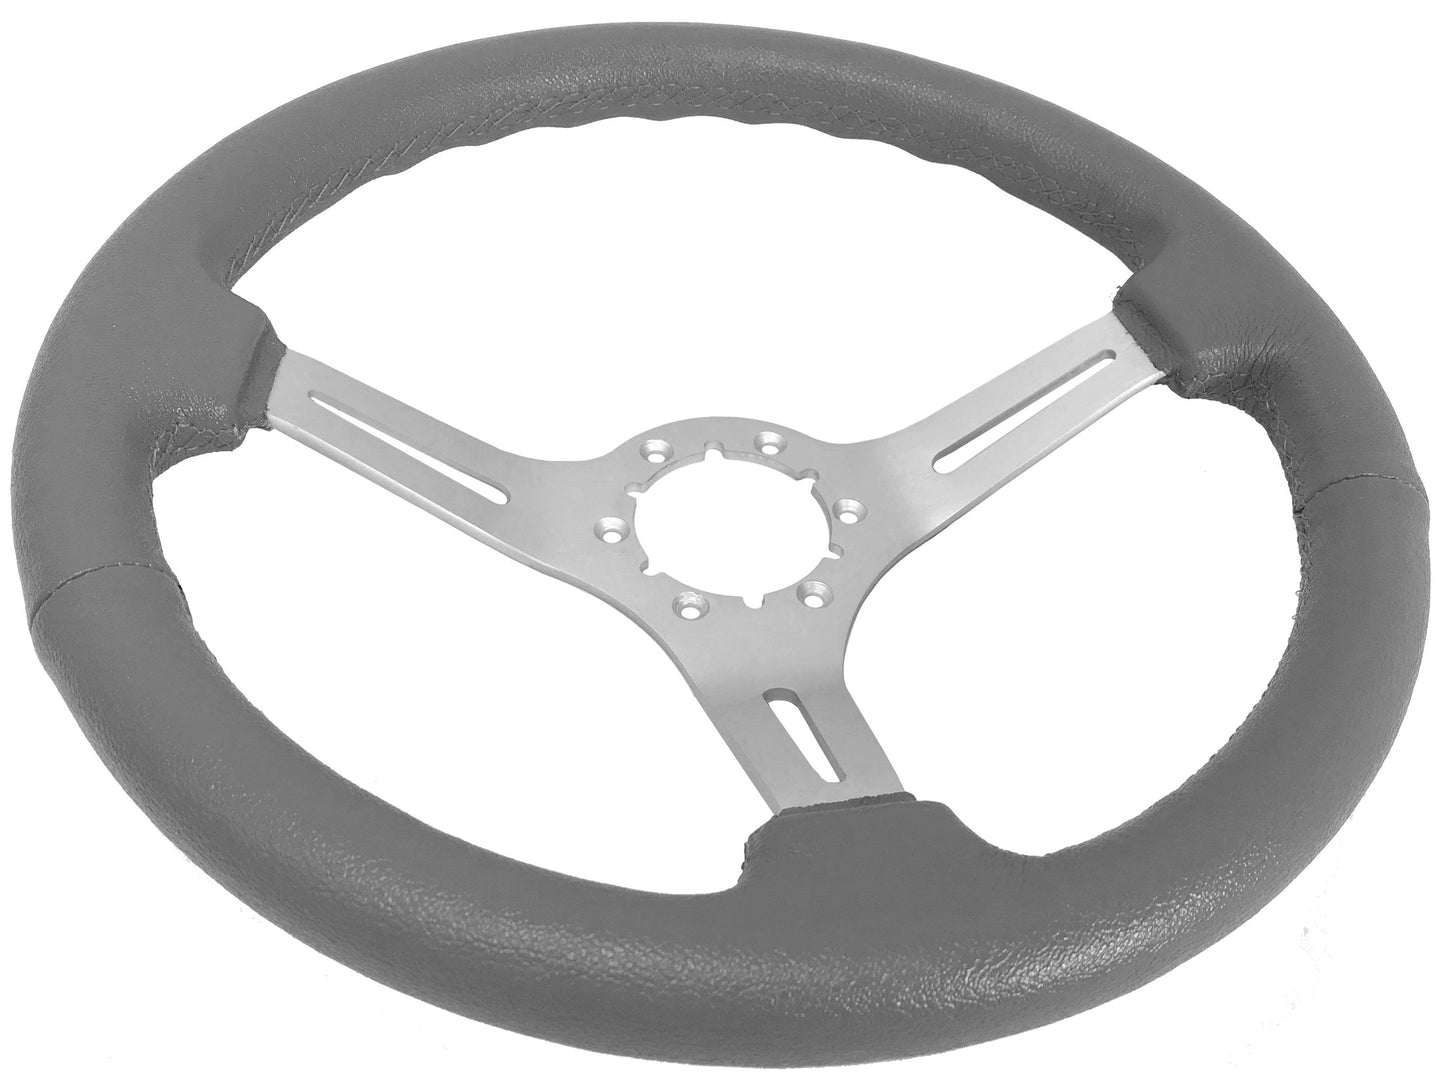 1969-89 Cadillac Telescopic Steering Wheel Kit | Grey Leather | ST3014GRY